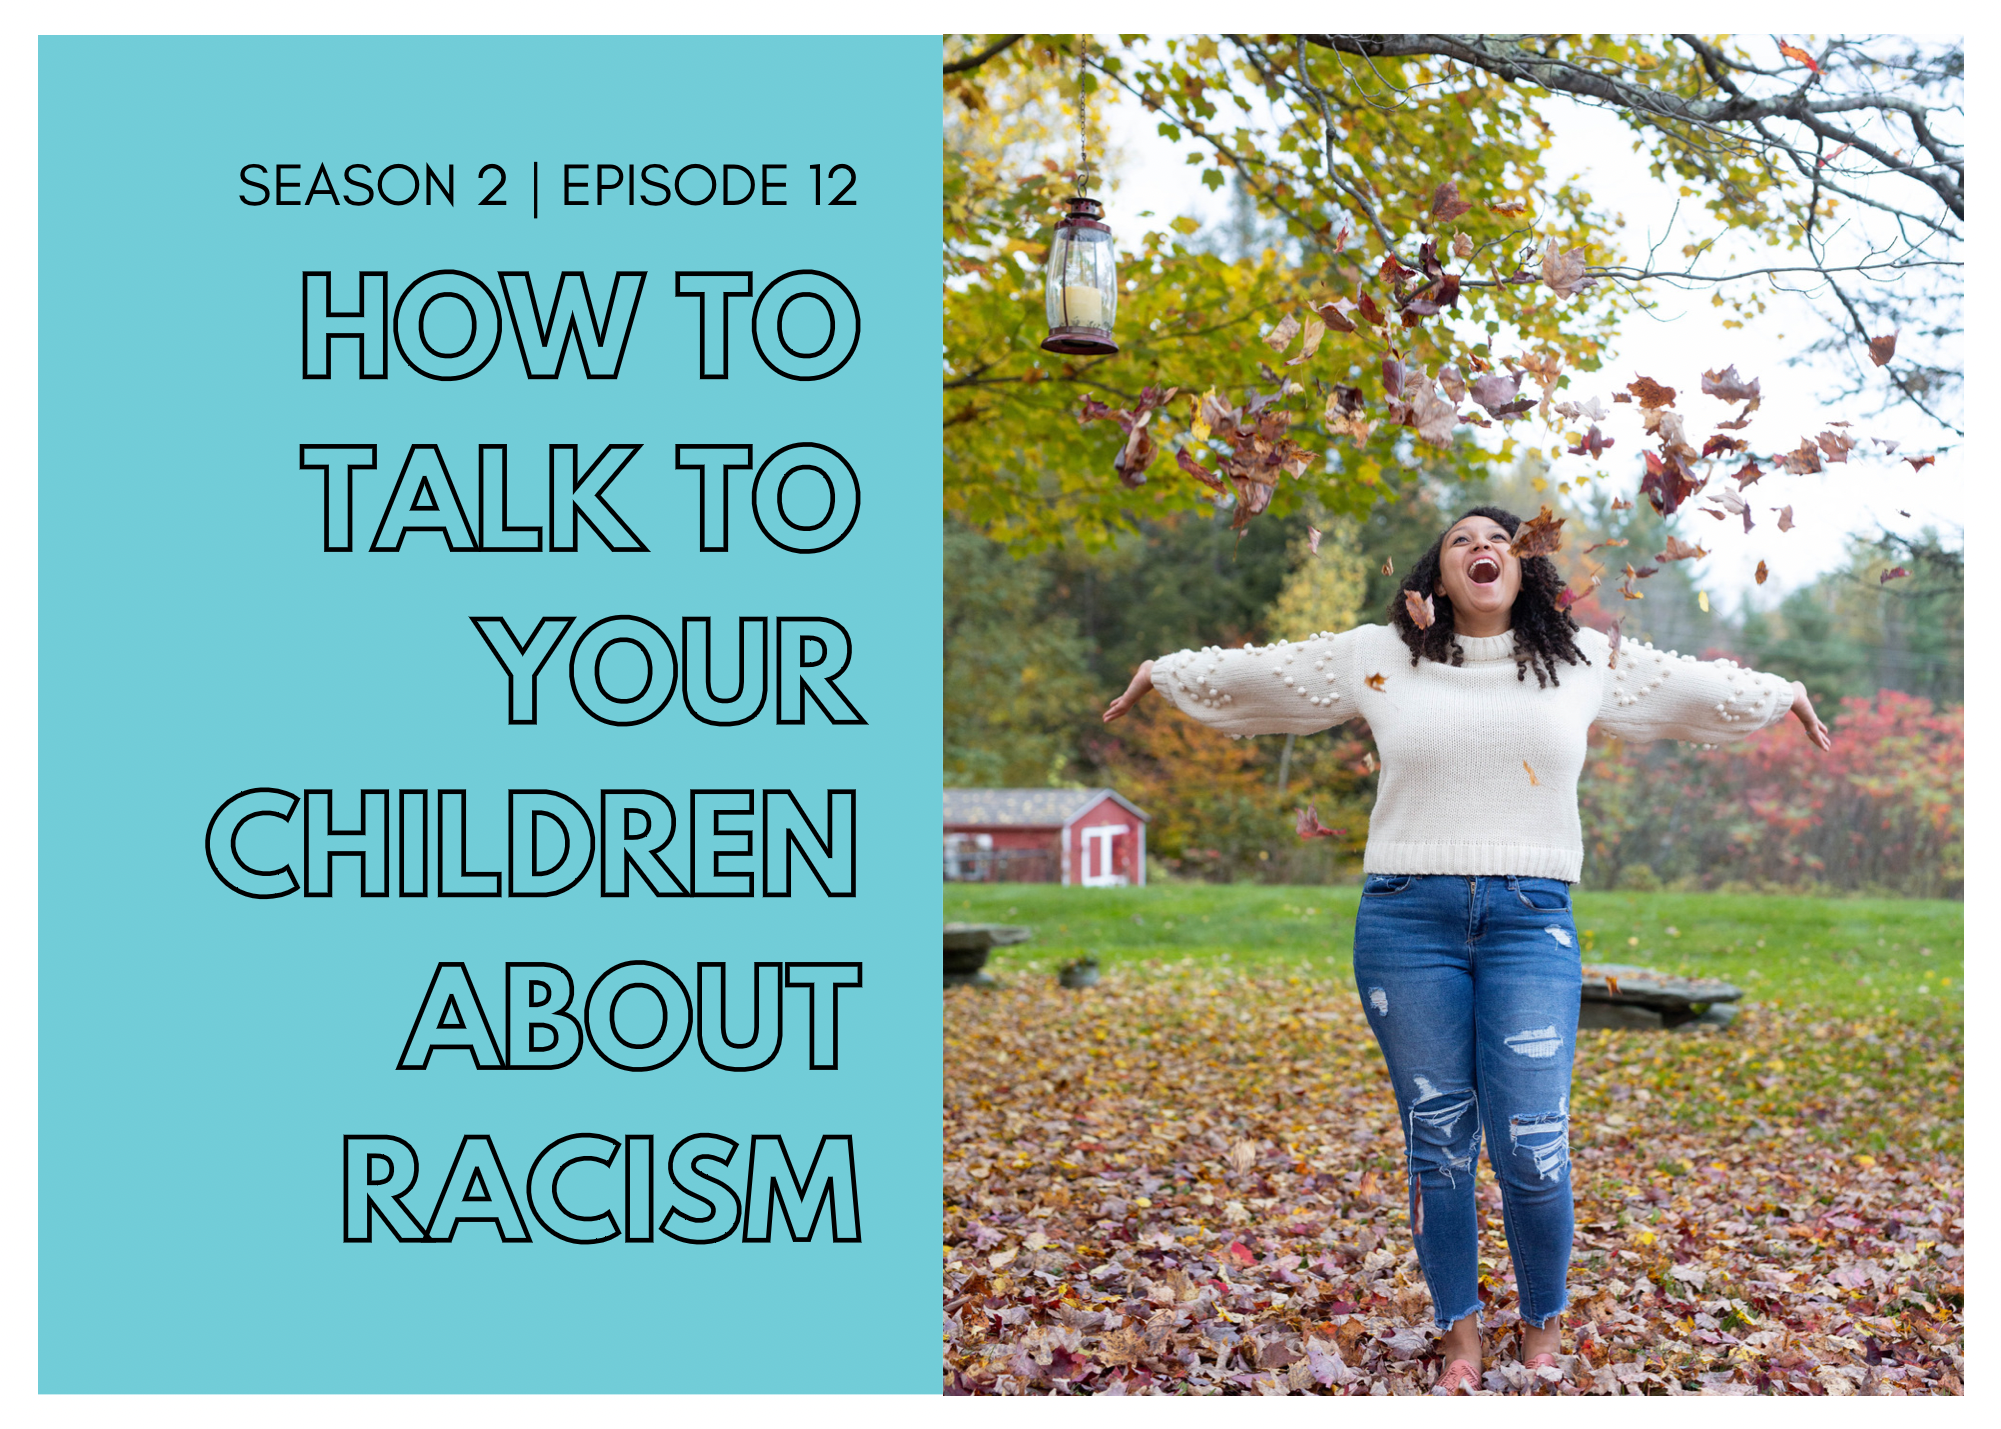 How to Talk to Your Children About Racism